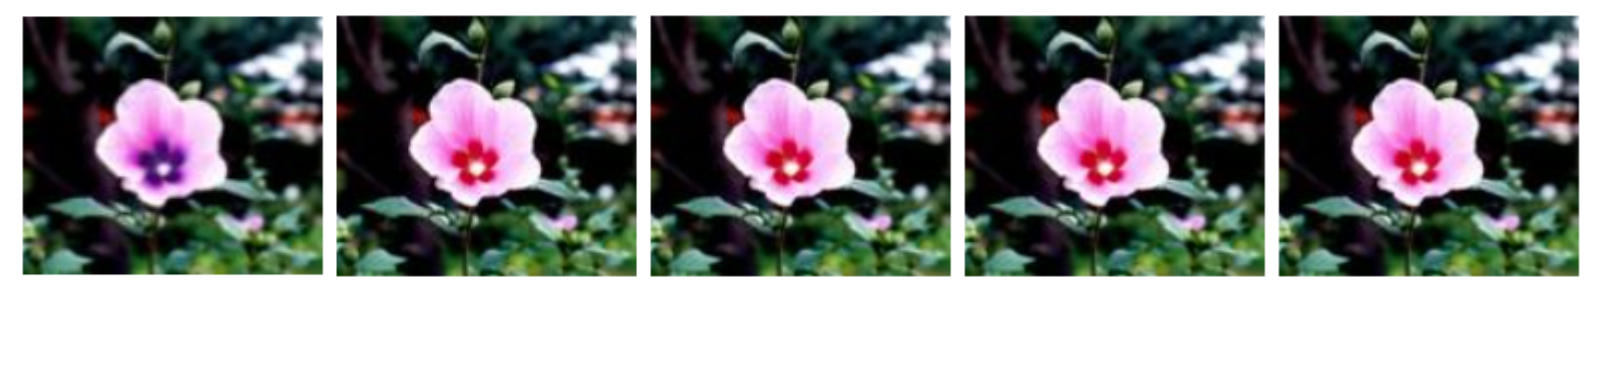 Five separate pictures of a single flower are lined up in a row. The 5 pictures of the flowers are identical, except for the first flower, which is a slightly different color. This first flower is slightly blue in color, while the other 4 flowers are pink.